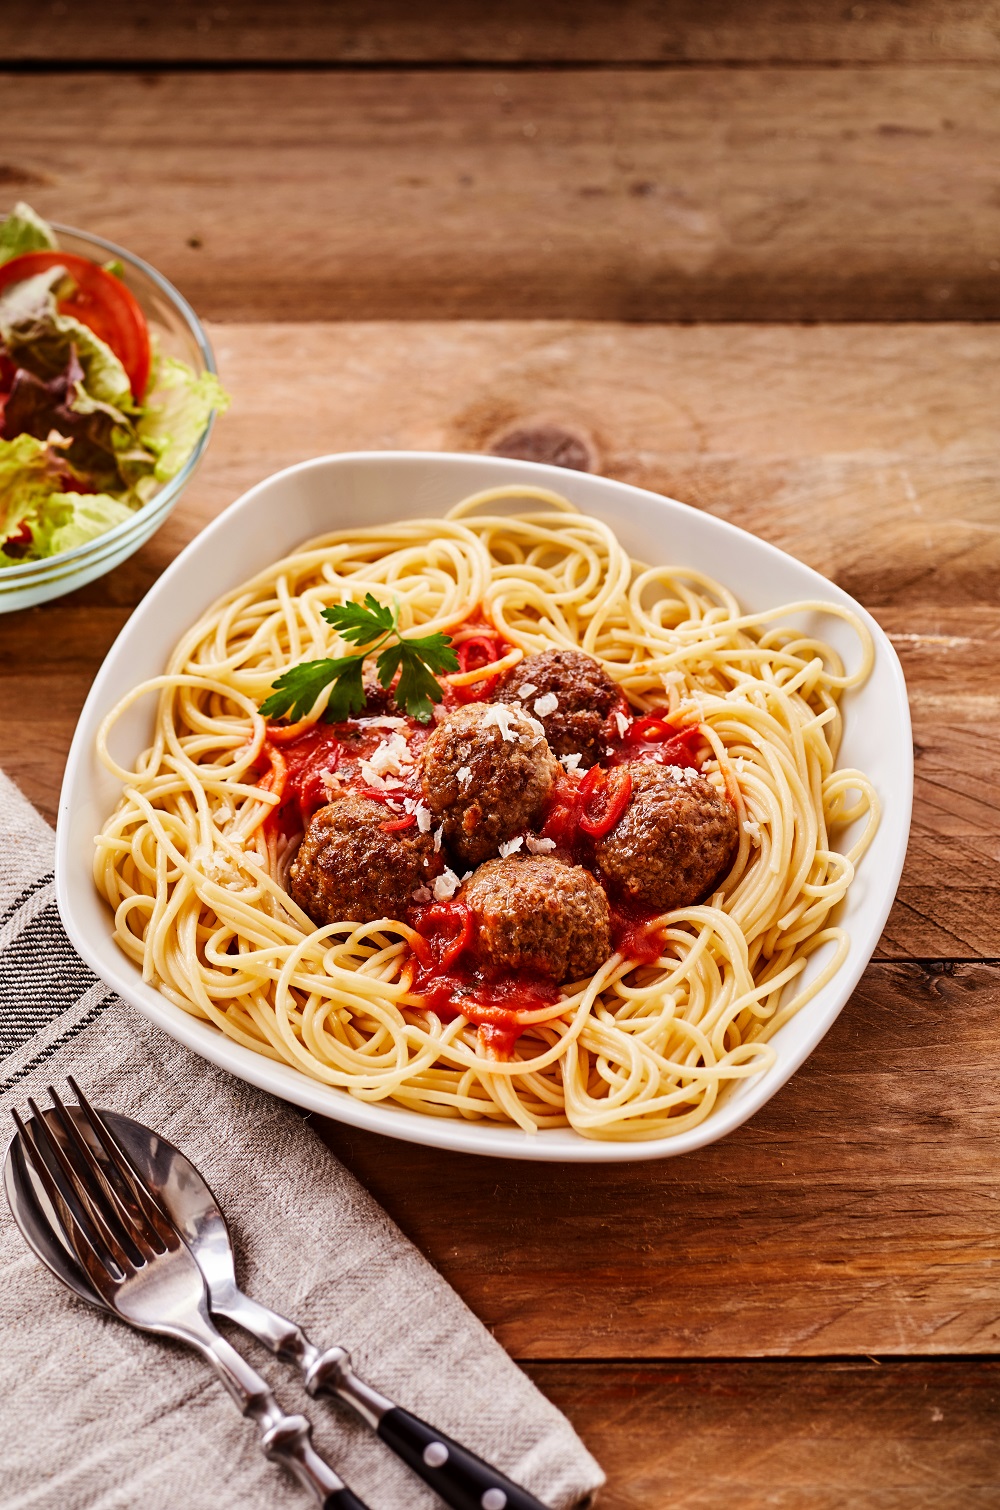 Spaghetti and Meatballs Served with Side Salad